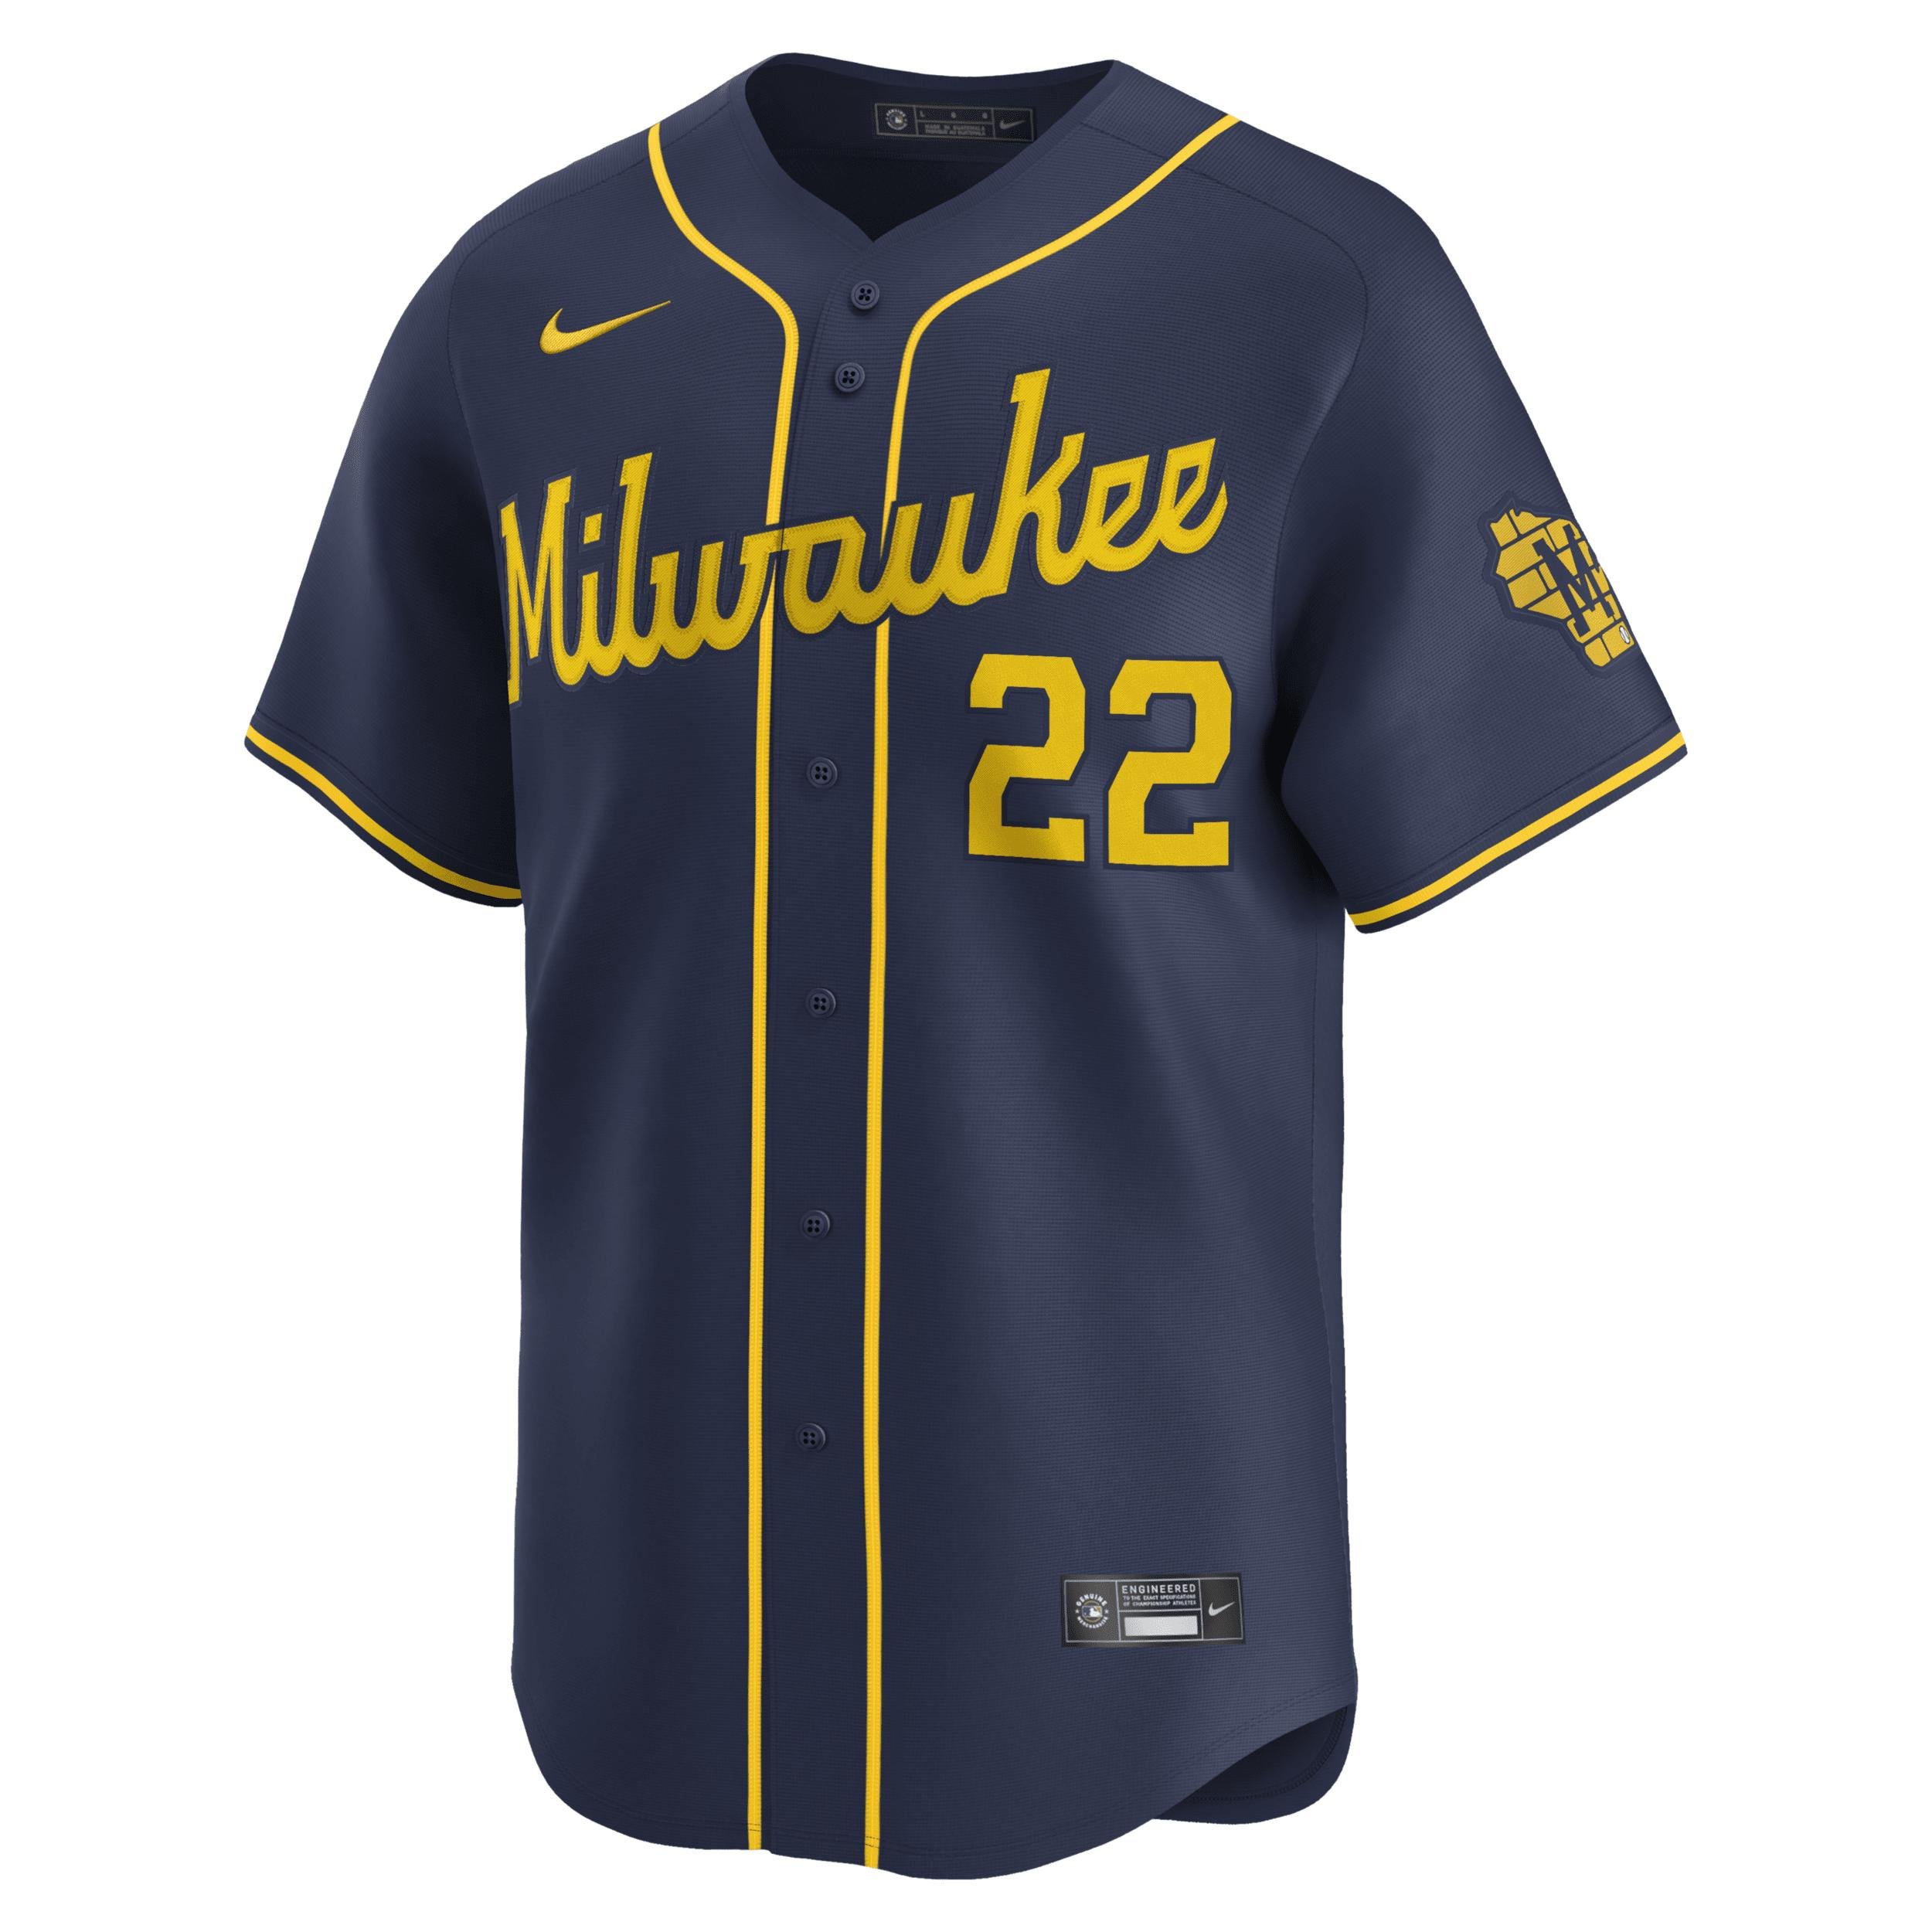 Christian Yelich Milwaukee Brewers Nike Men's Dri-FIT ADV MLB Limited Jersey by NIKE